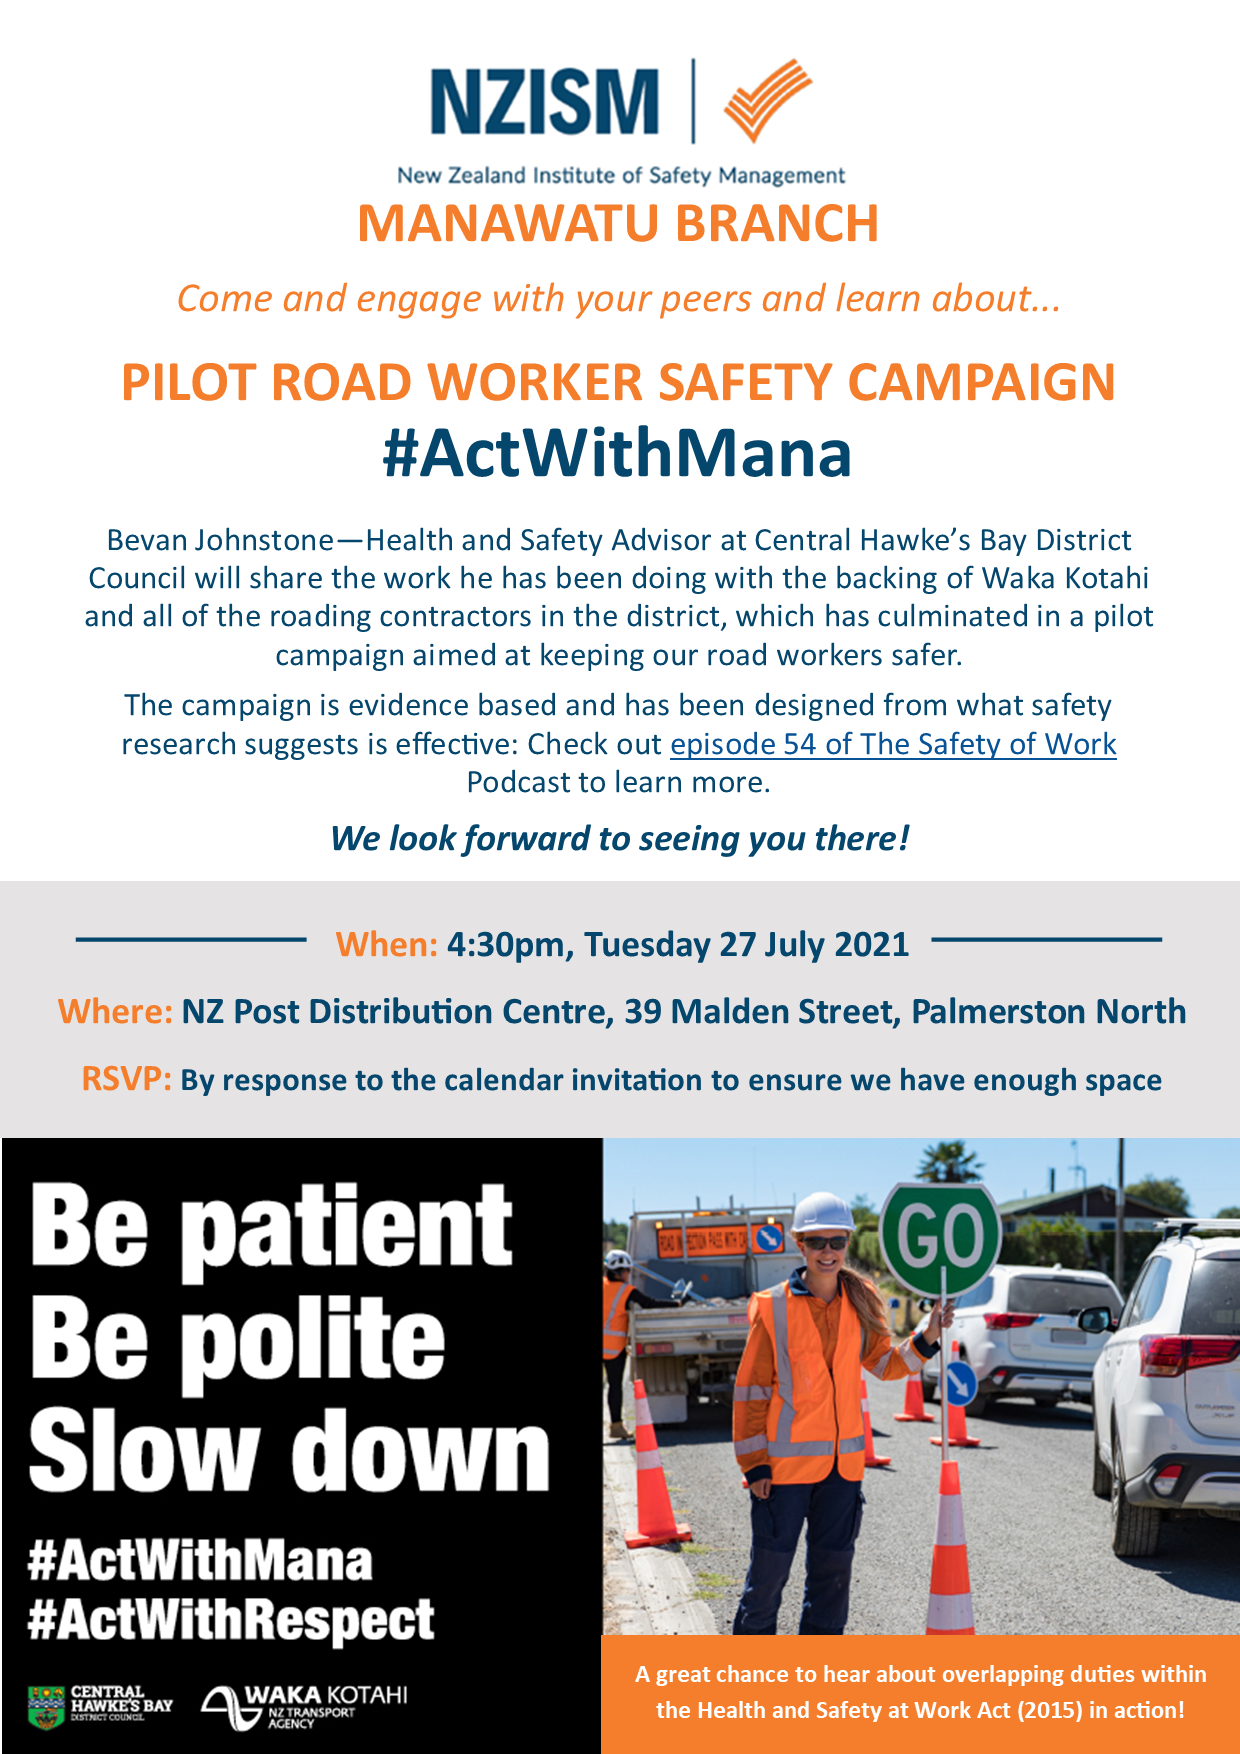 image for Manawatu Branch: Pilot Road Worker Safety Campaign #ActWithMana